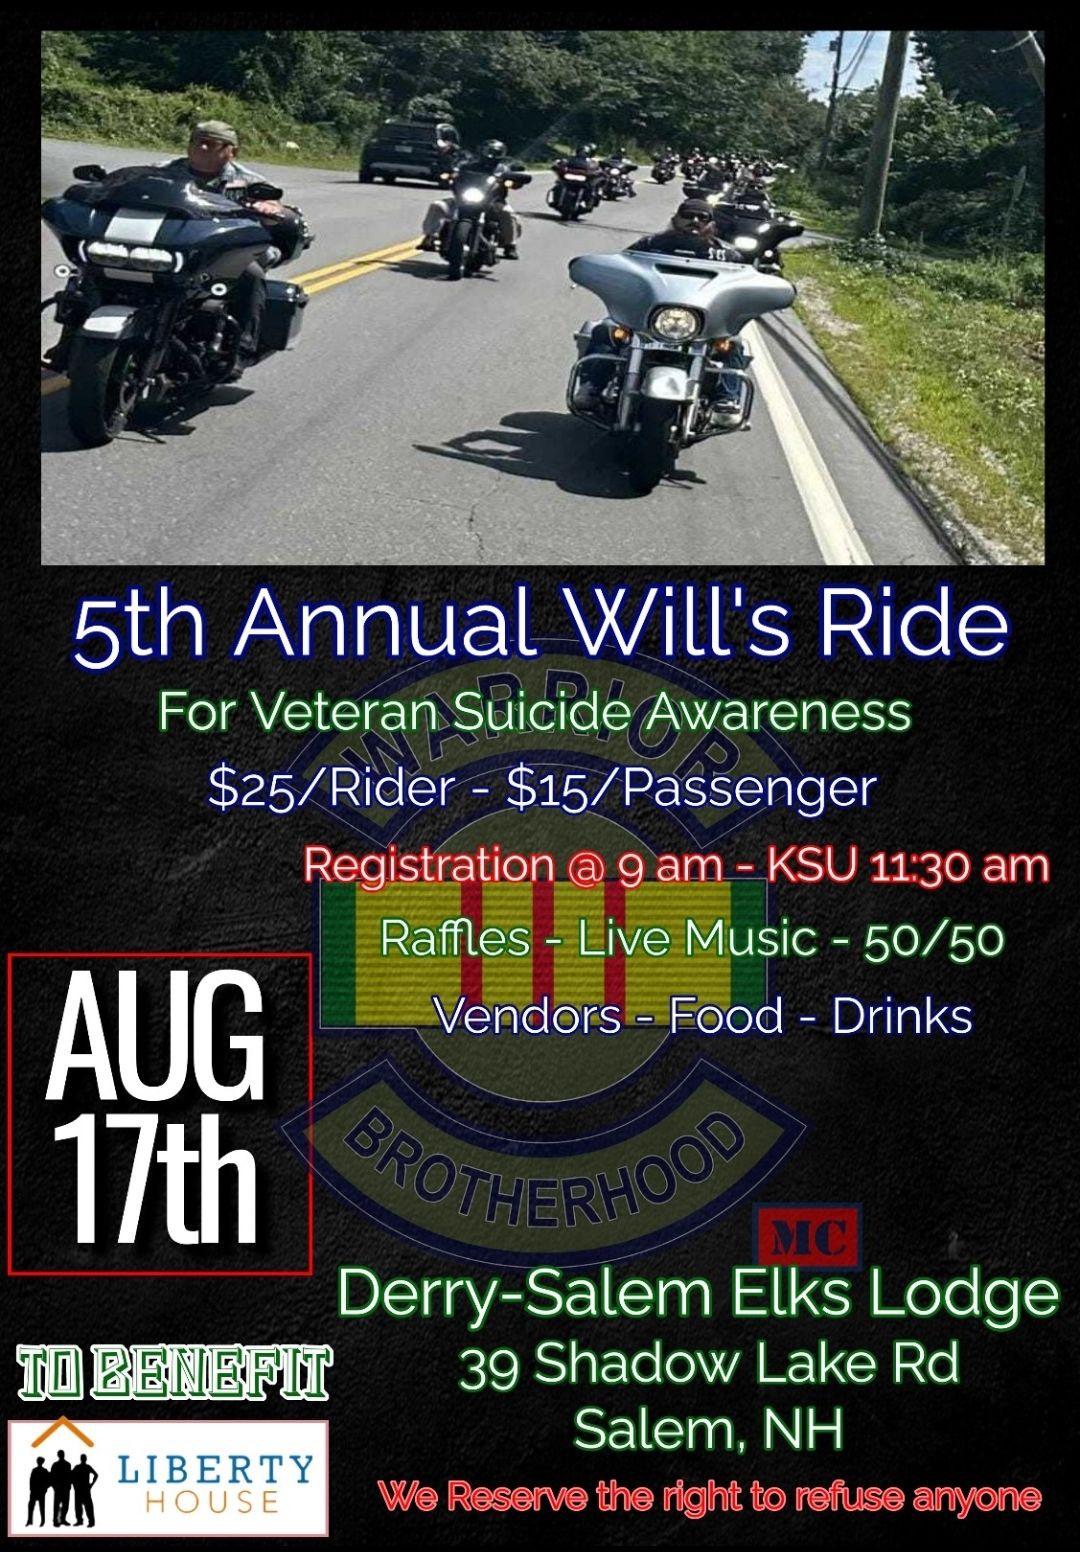 5th Annual Will's Ride for Veteran's Suicide Awareness